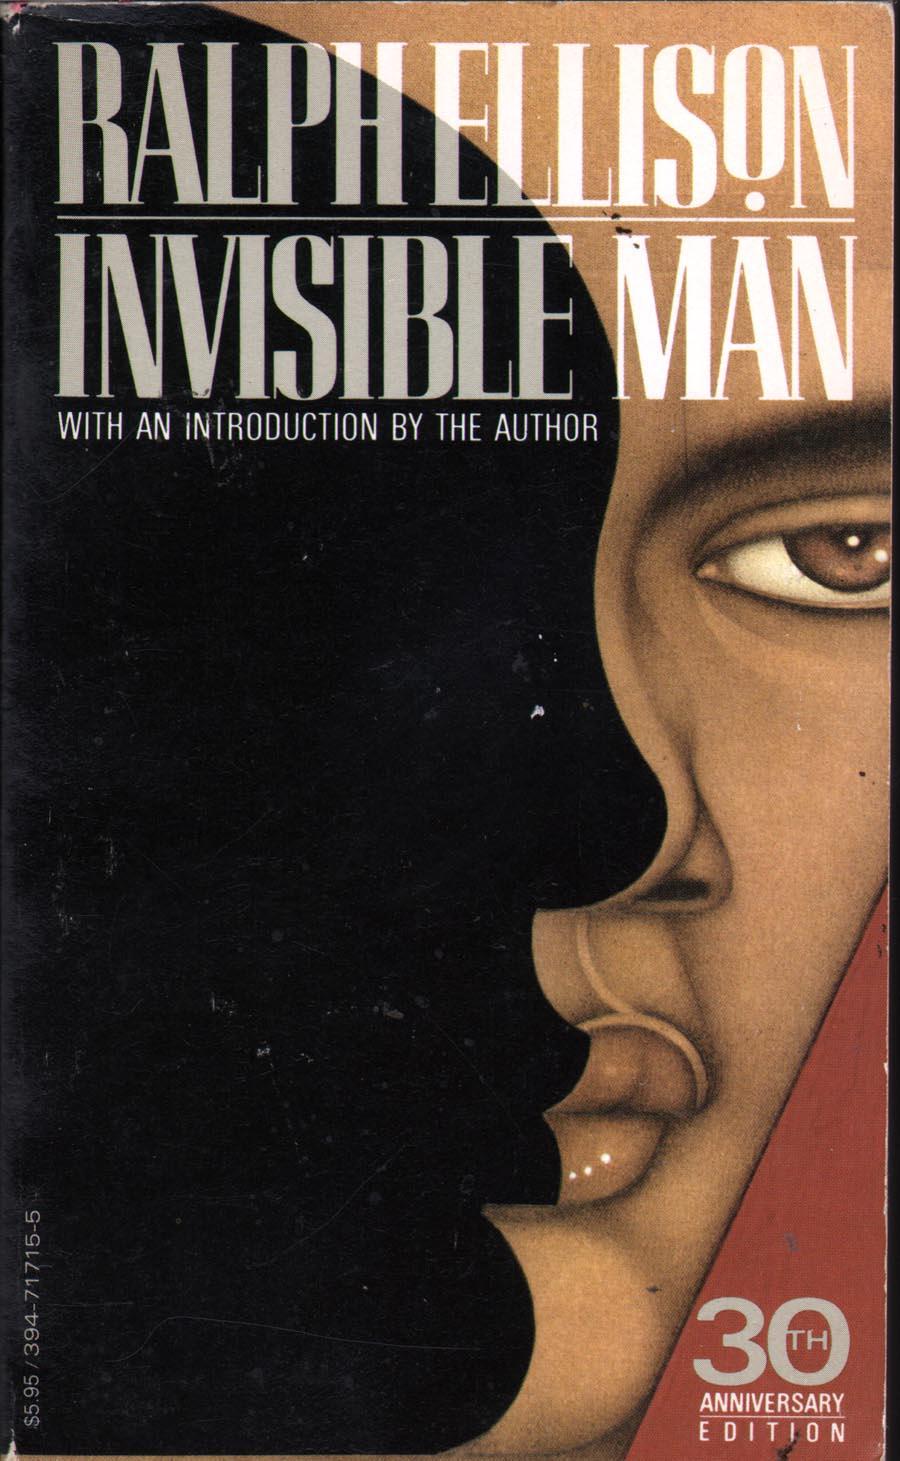 Ralph Ellison, Invisible Man, African American Literature, Black Literature, African American Author, African American Books, KOLUMN Magazine, KOLUMN